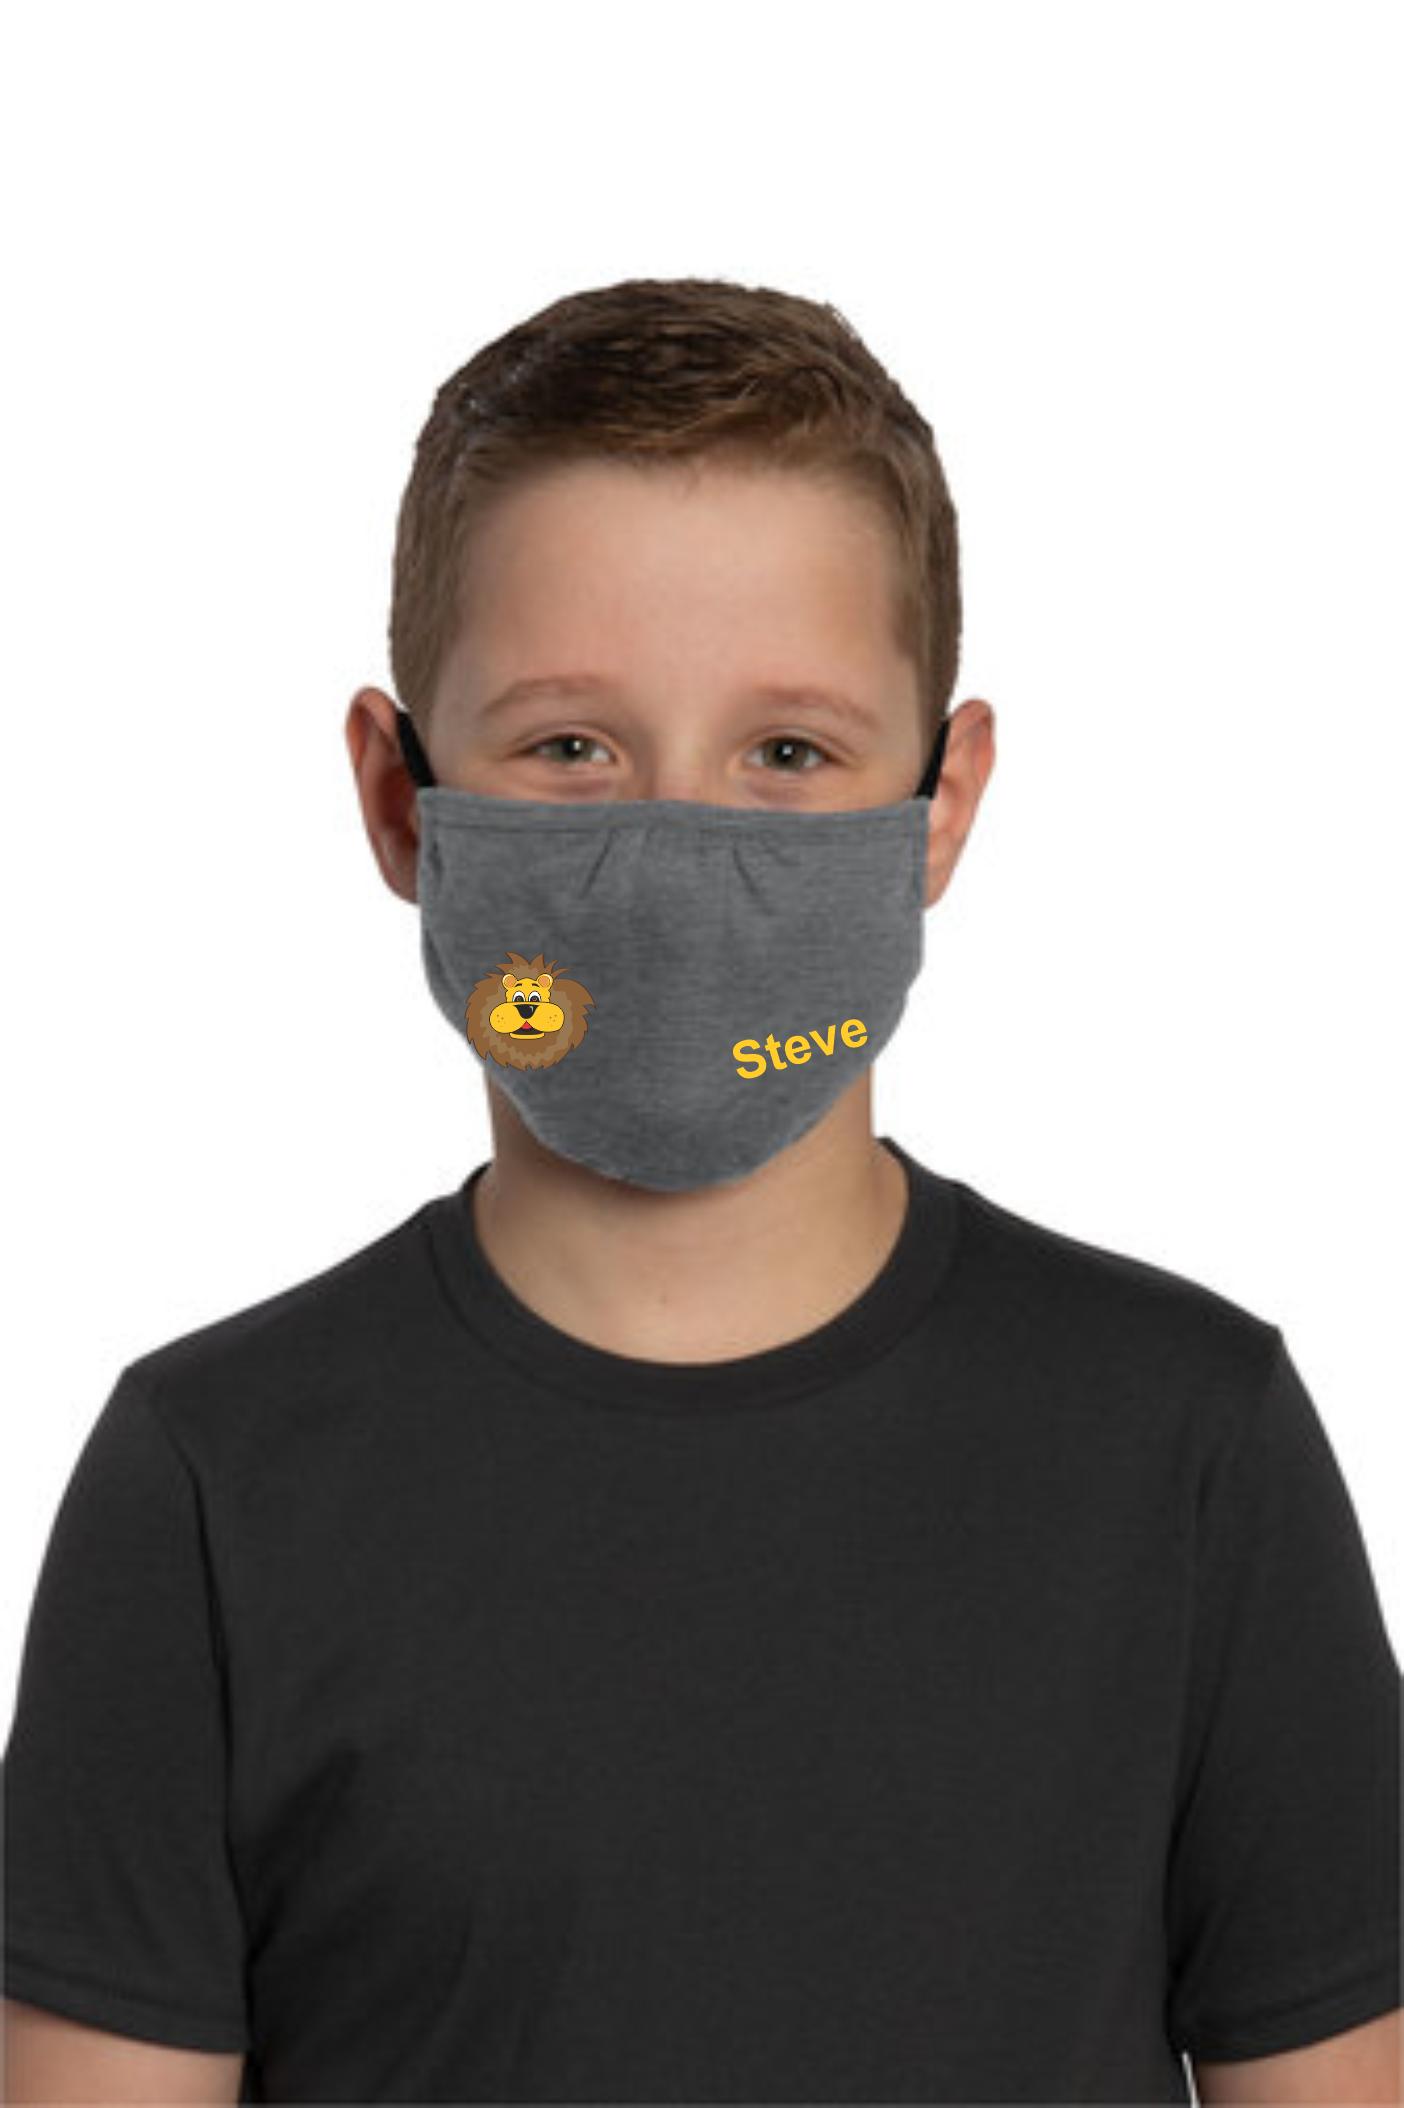 LINCOLN ELEMENTARY PERSONALIZED mask